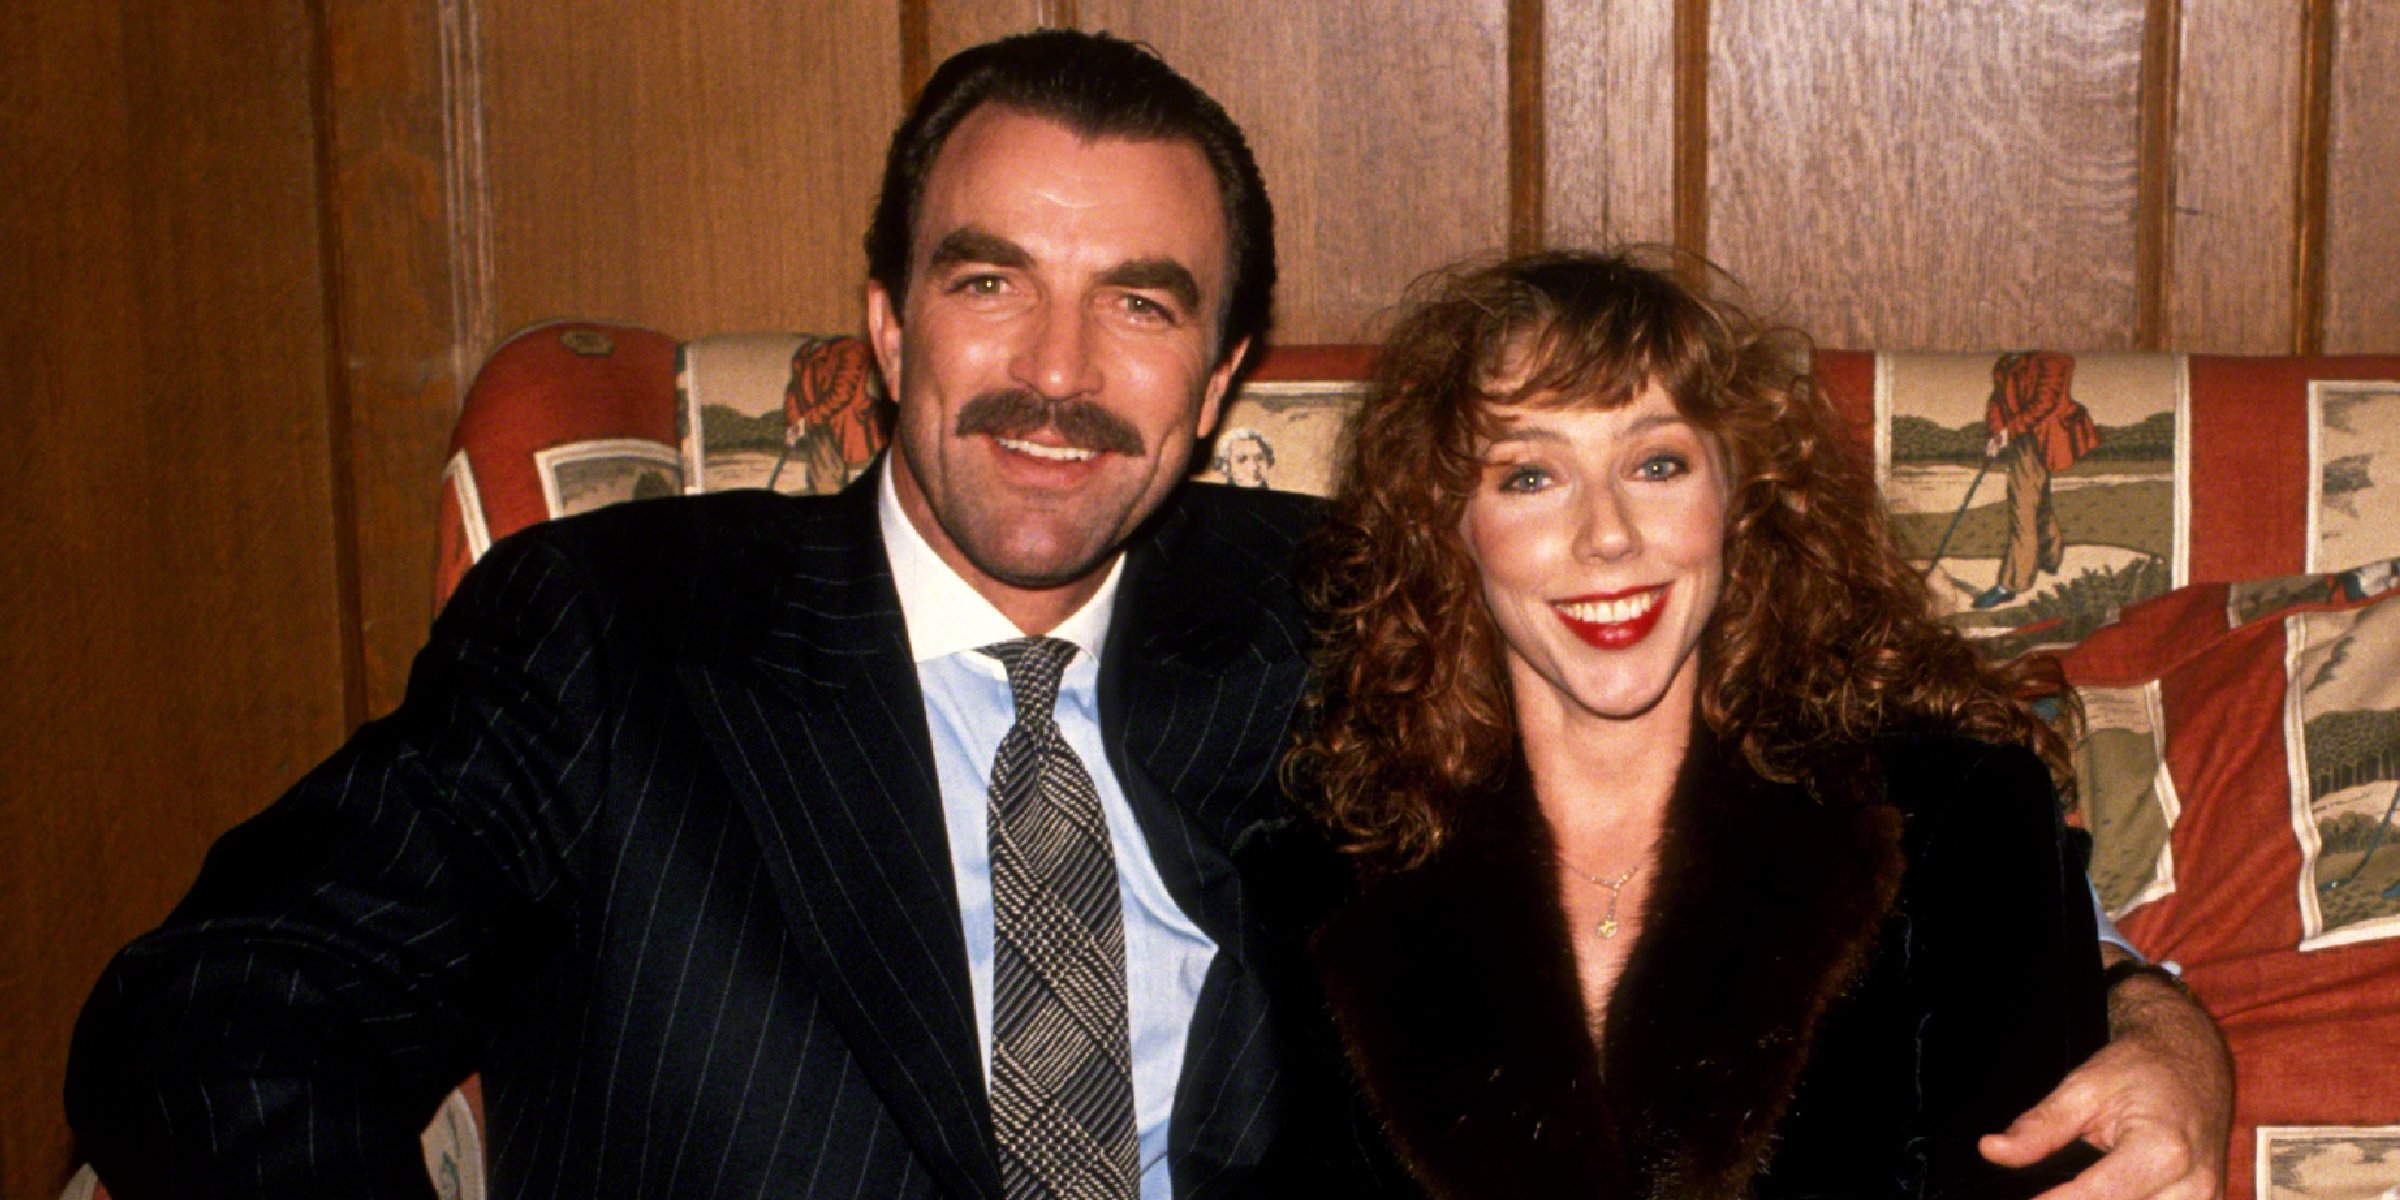 Tom Selleck and Jillie Mack Selleck | Source: Getty Images